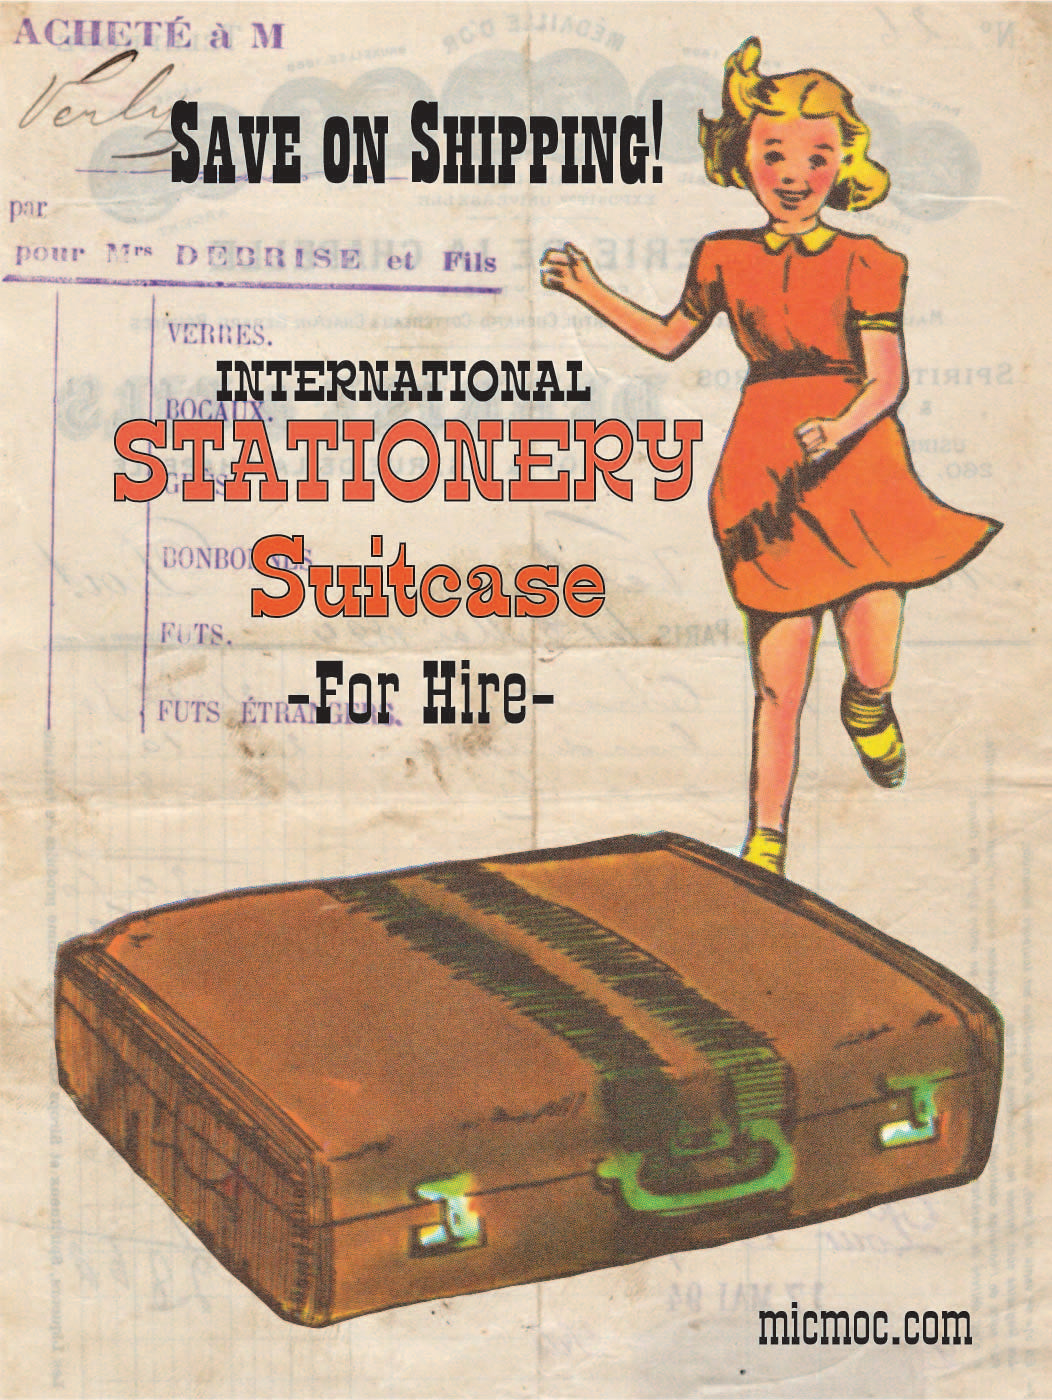 international suitcase hire from micmoc.com